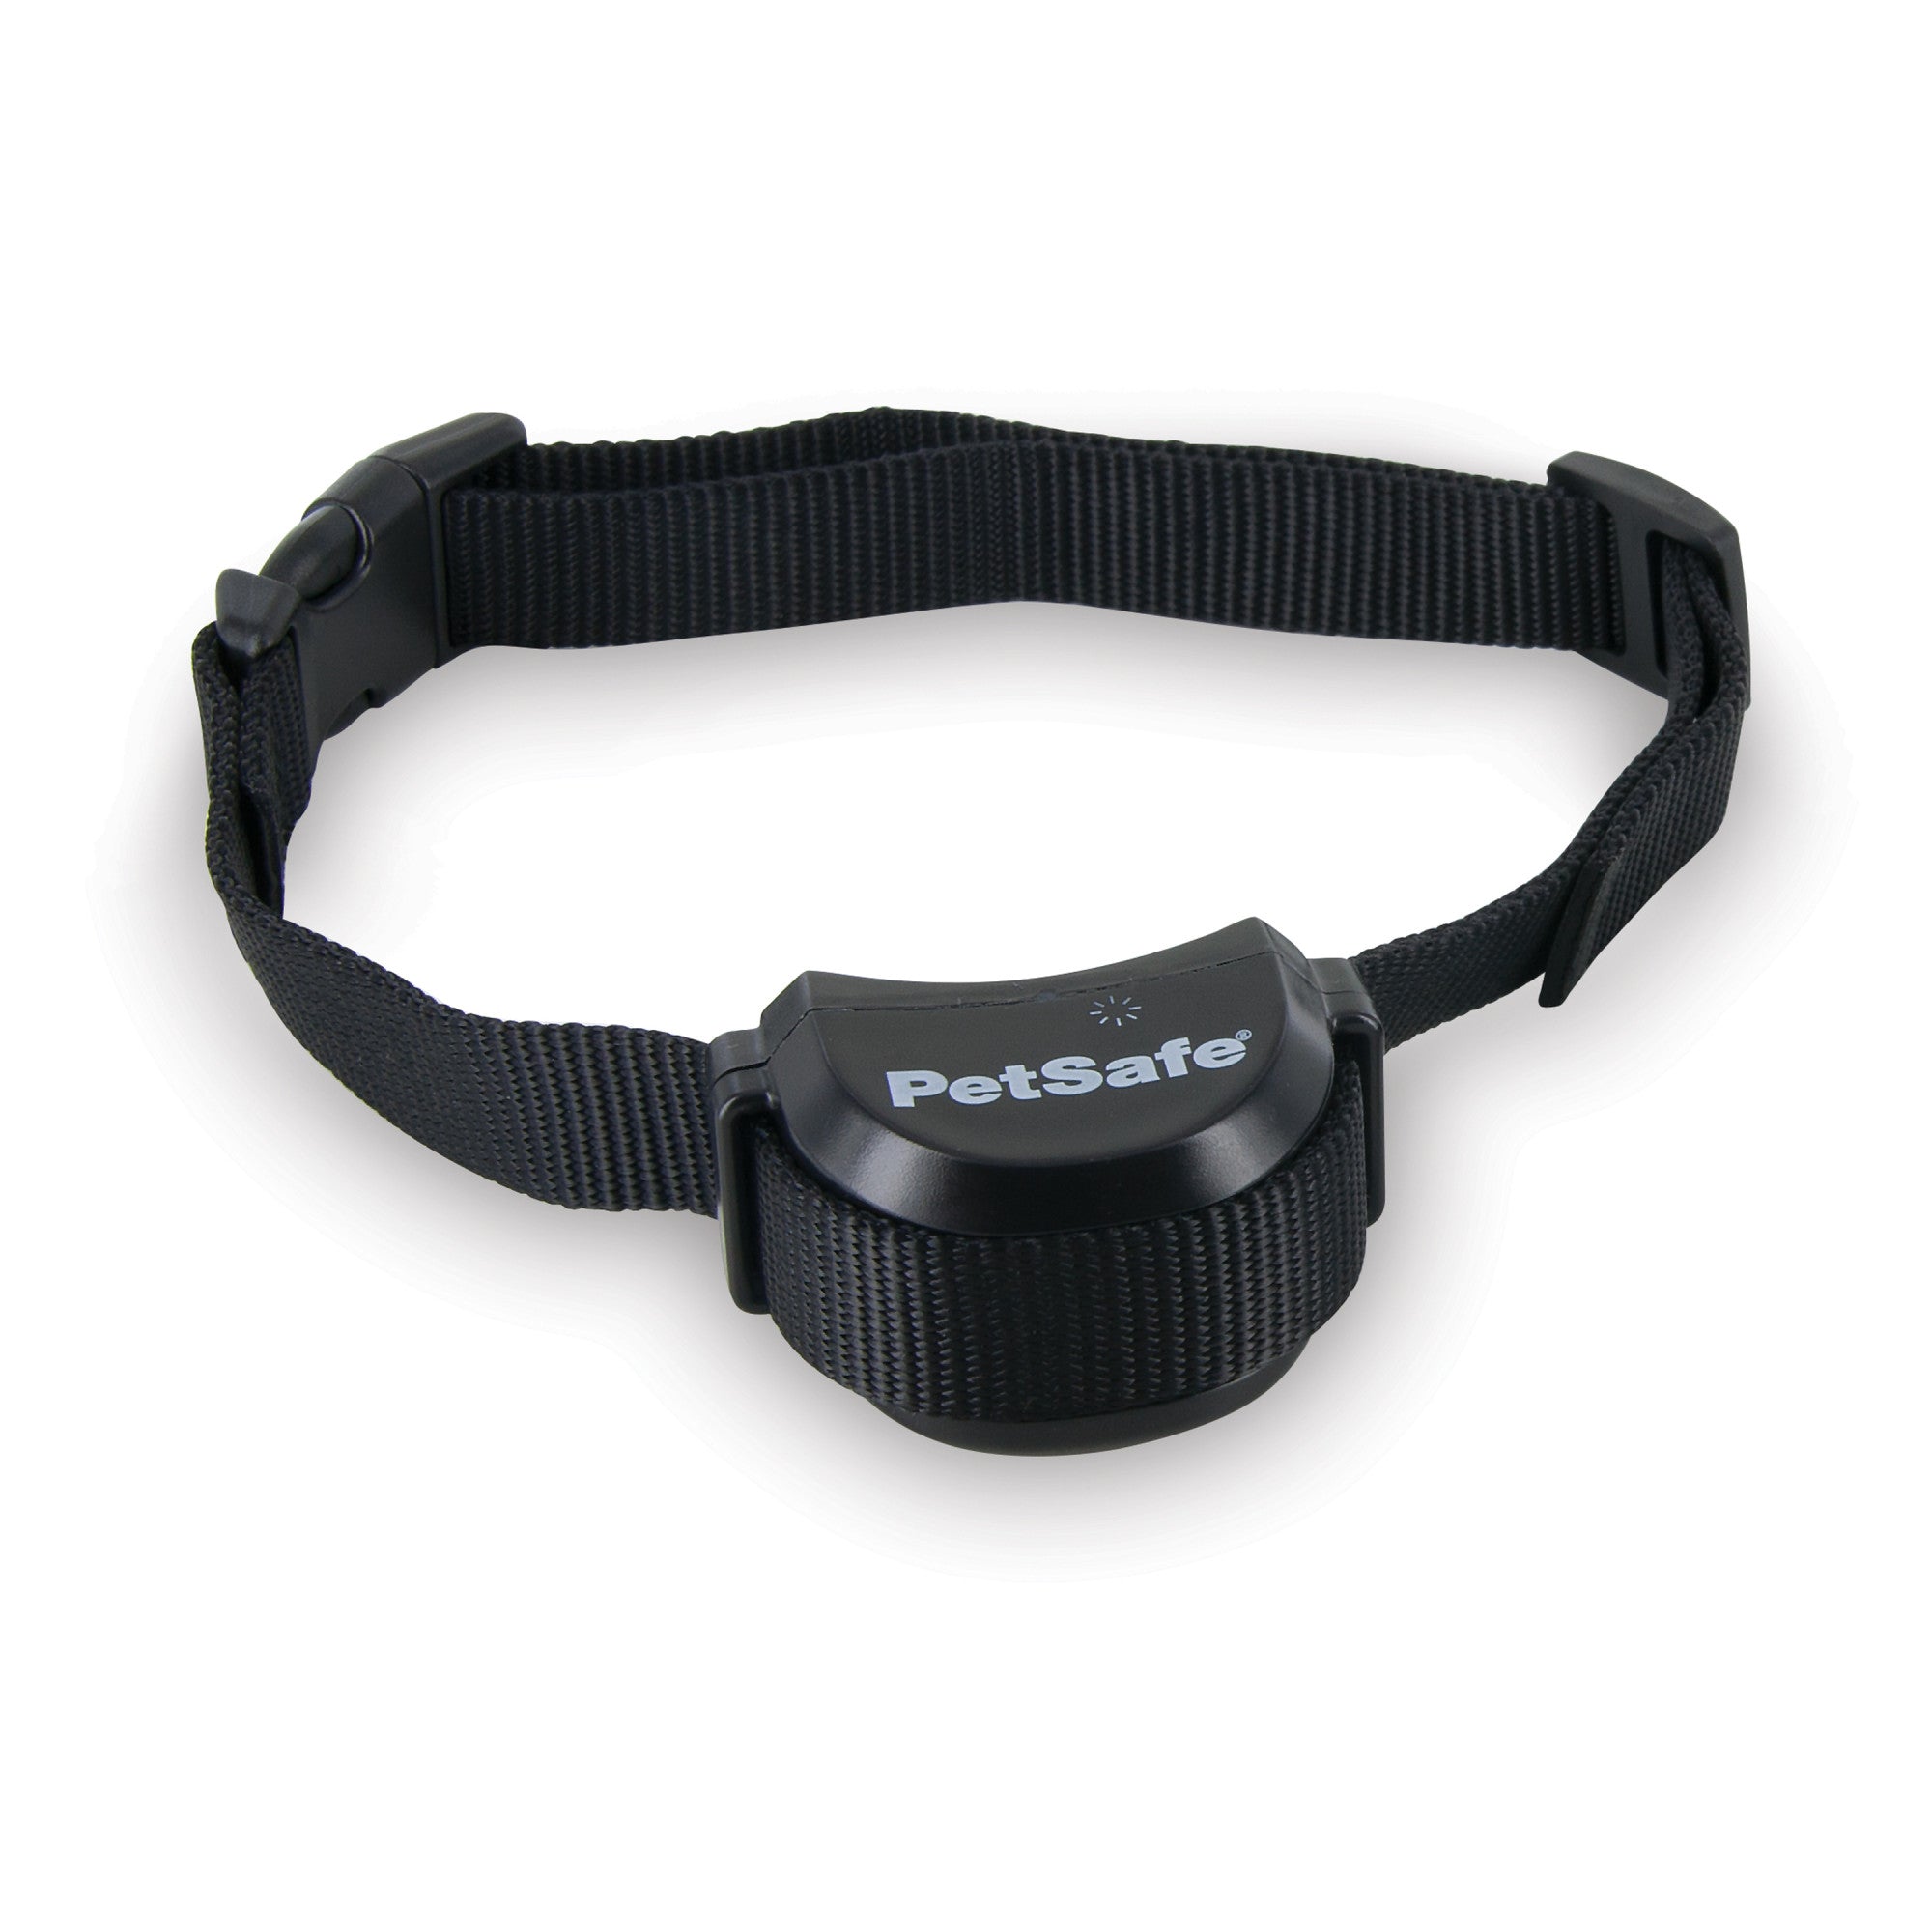 PetSafe Stay + Play Wireless Fence Receiver Collar Only for Dogs and C –  Petsense